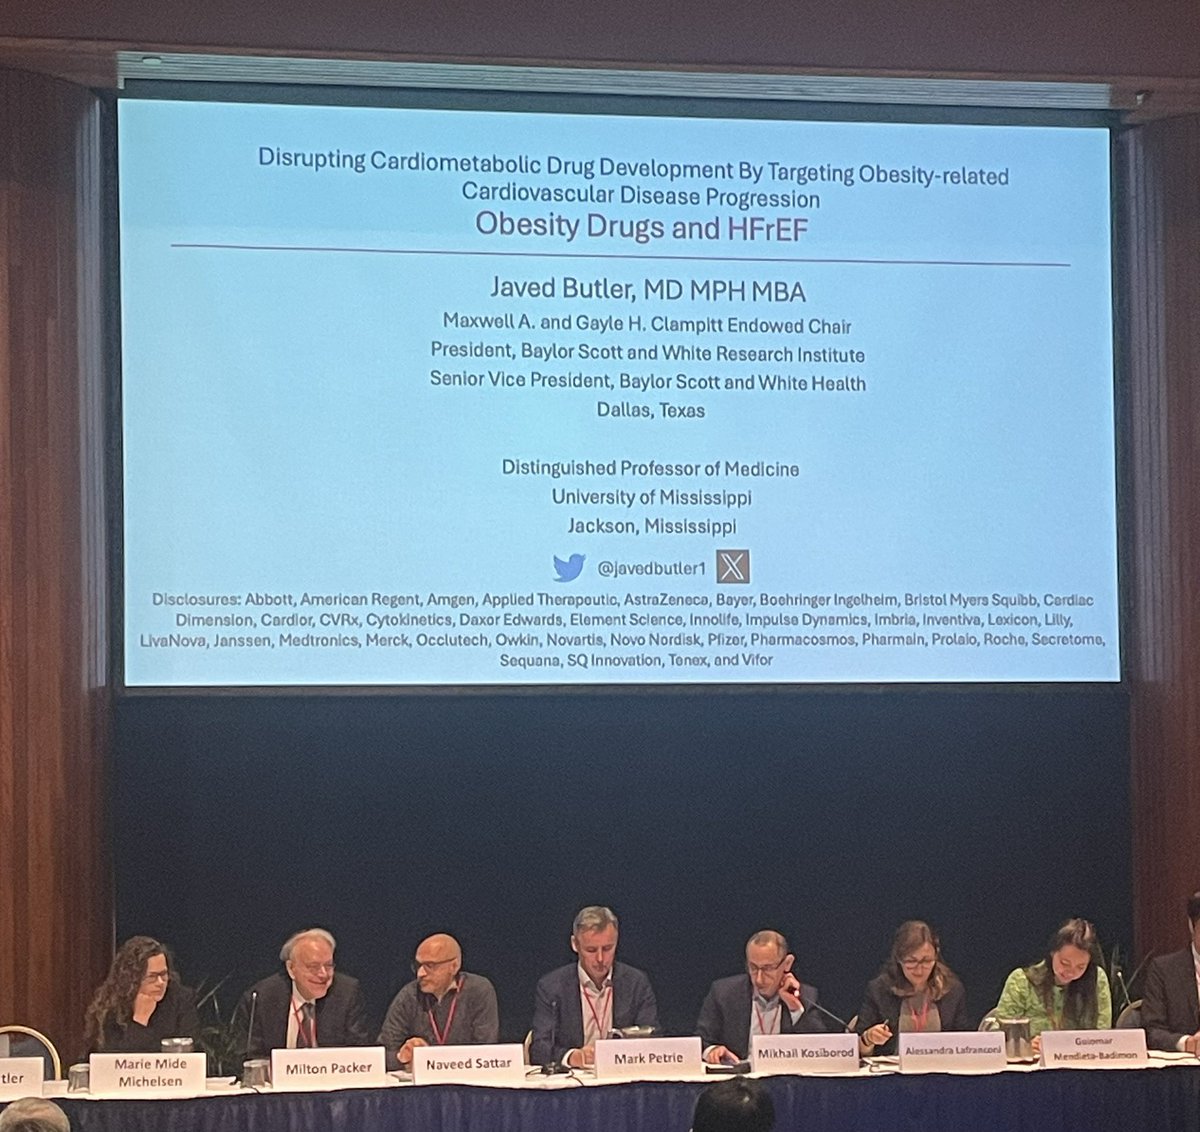 Second day of #CVCT23. Obesity moves center stage at @CVCTForum. Session 2/2 and the discussion continues with @JavedButler1 focusing on #obesity drugs in #HFrEF